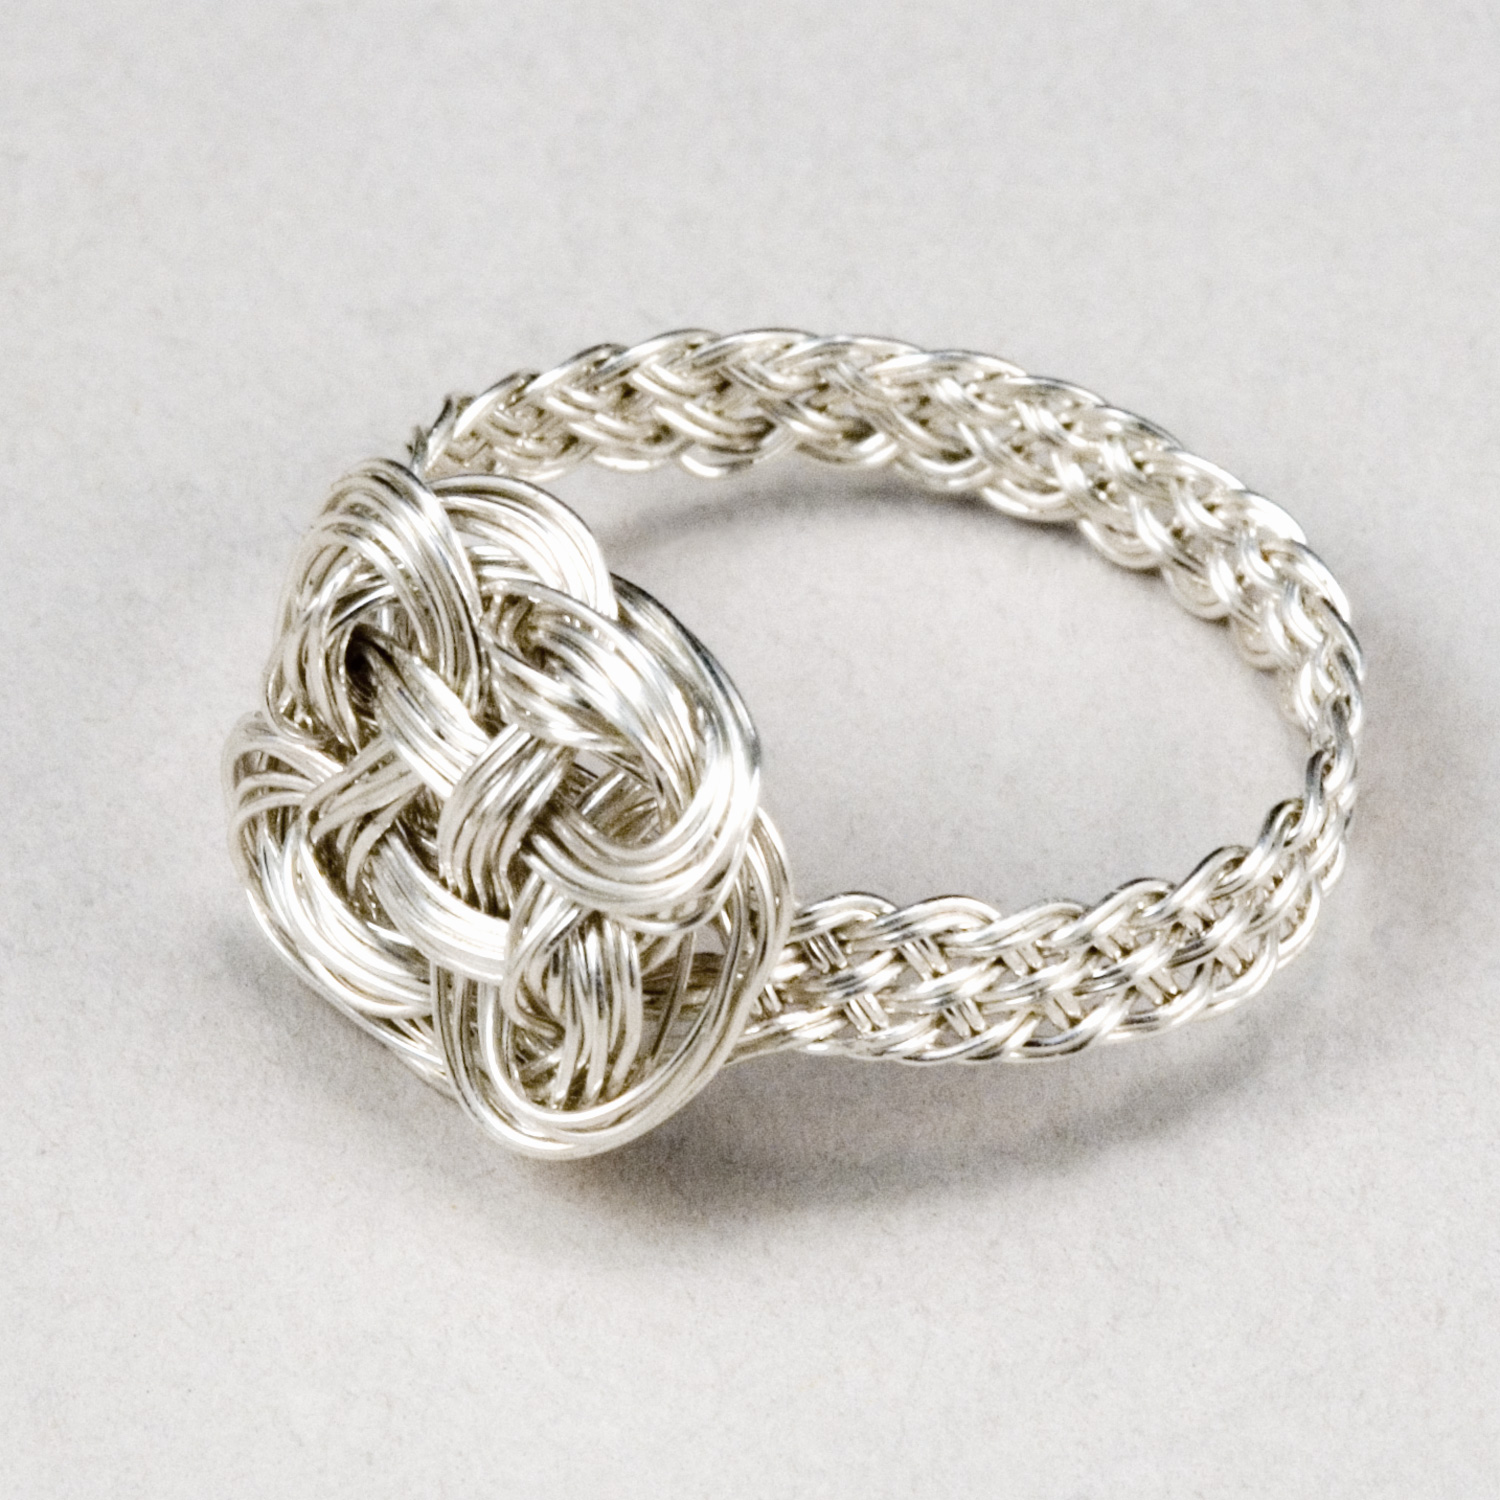 Turks Head Knot Ring in sterling silver by Tamberlaine